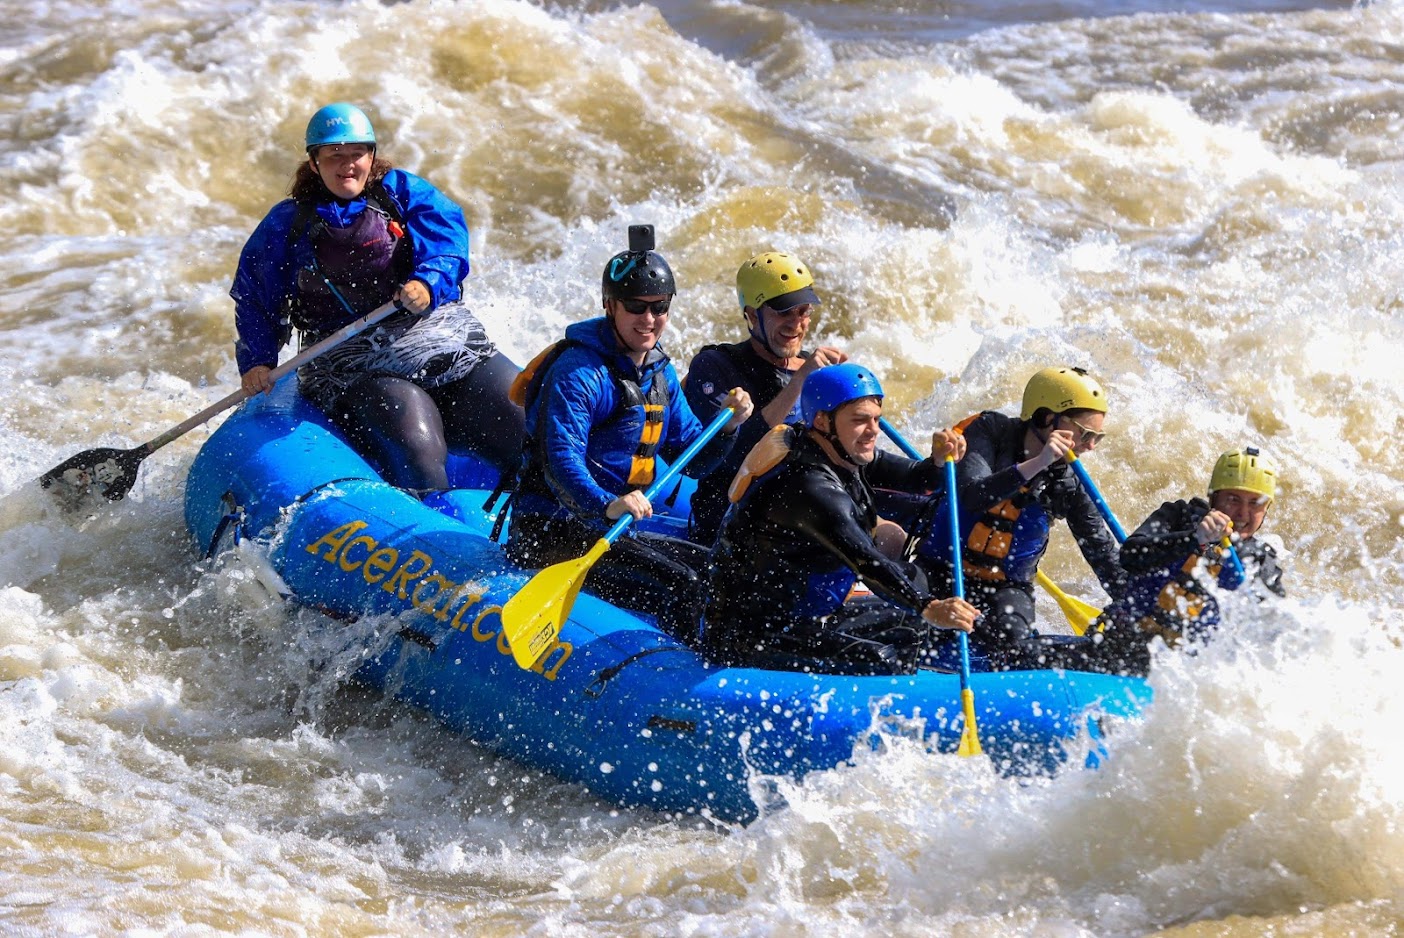 People whitewater rafting on a blue raft that says AceRaft.com